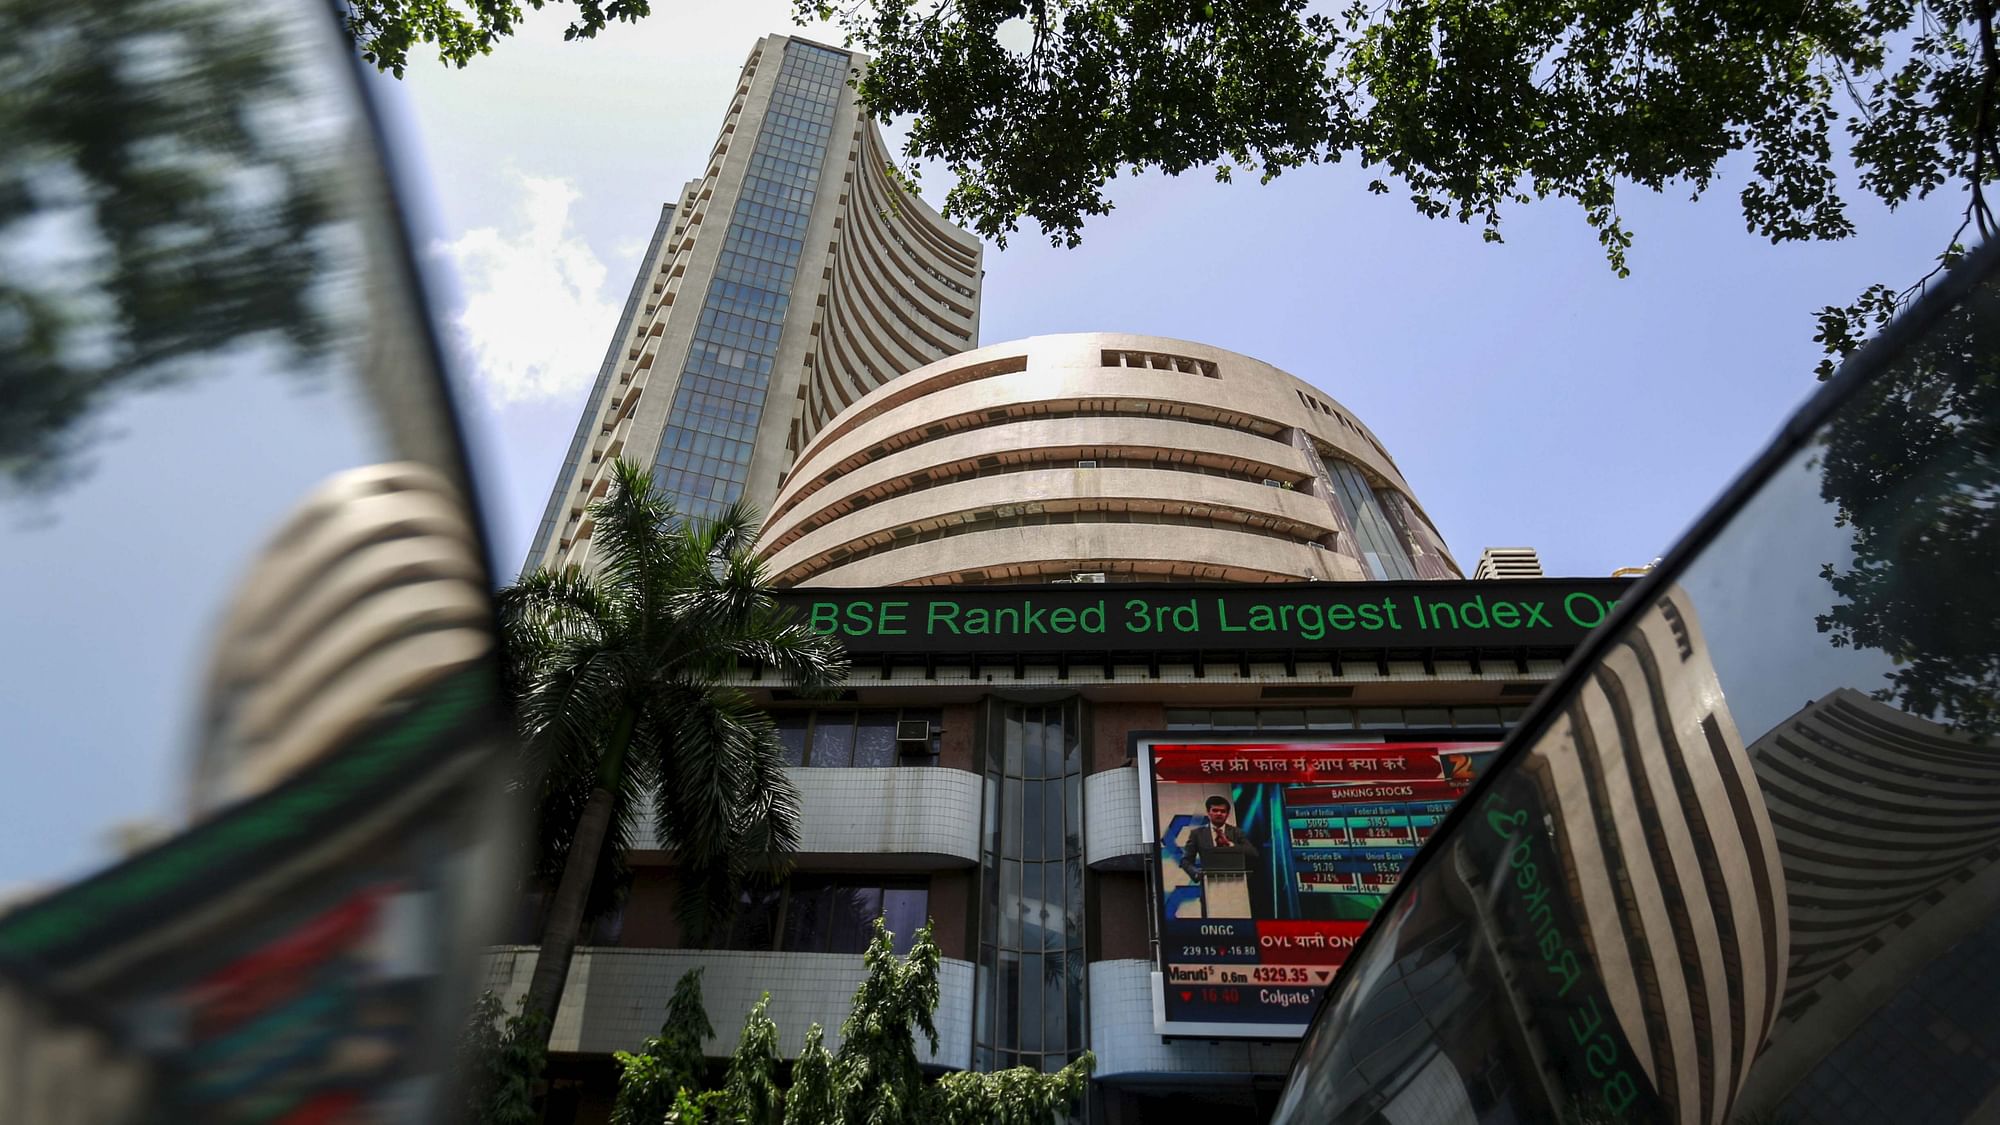 The benchmark Nifty 50 of the NSE looks set to cross the 9,000 mark on Tuesday. (Photo: Reuters)